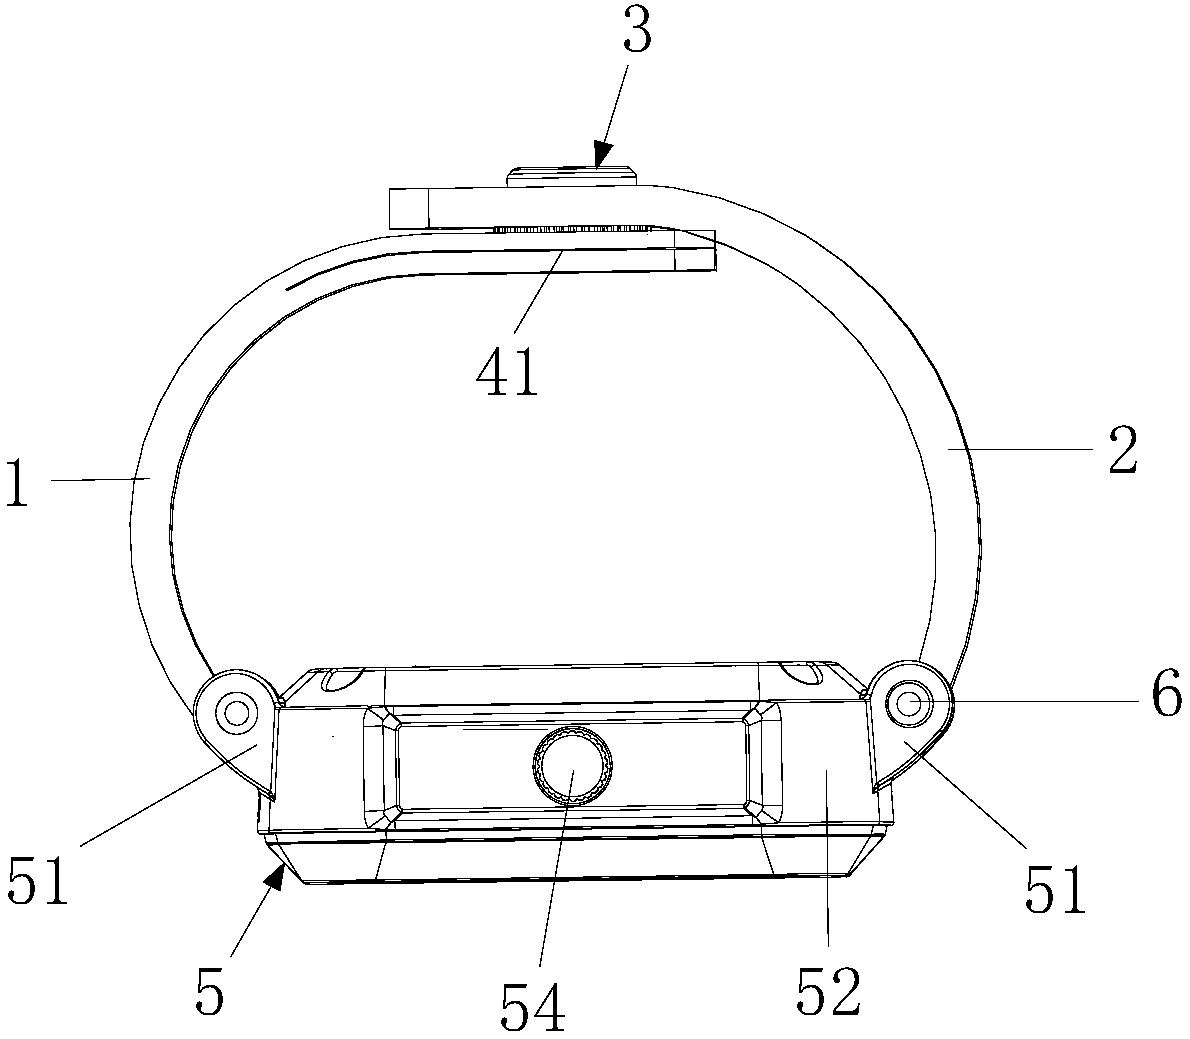 Watch strap adjusting structure and intelligent wearing device